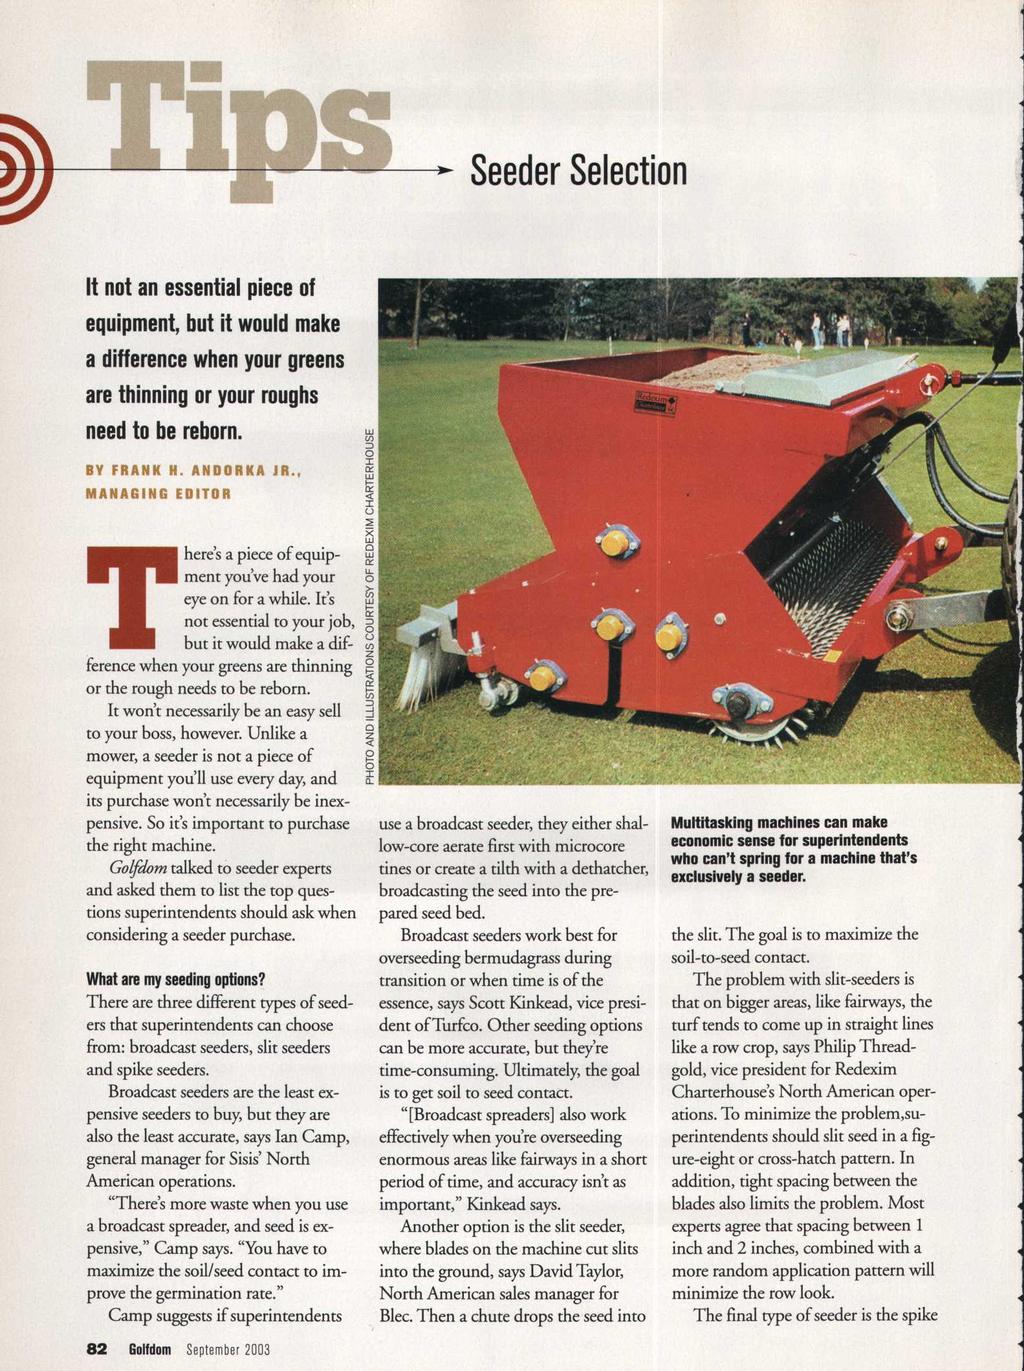 Seeder Selection It not an essential piece of equipment but it would make a difference when your greens are thinning or your roughs need to be reborn. BY FRANK H. ANDORRA M A i i i i i i EDITOR JR.